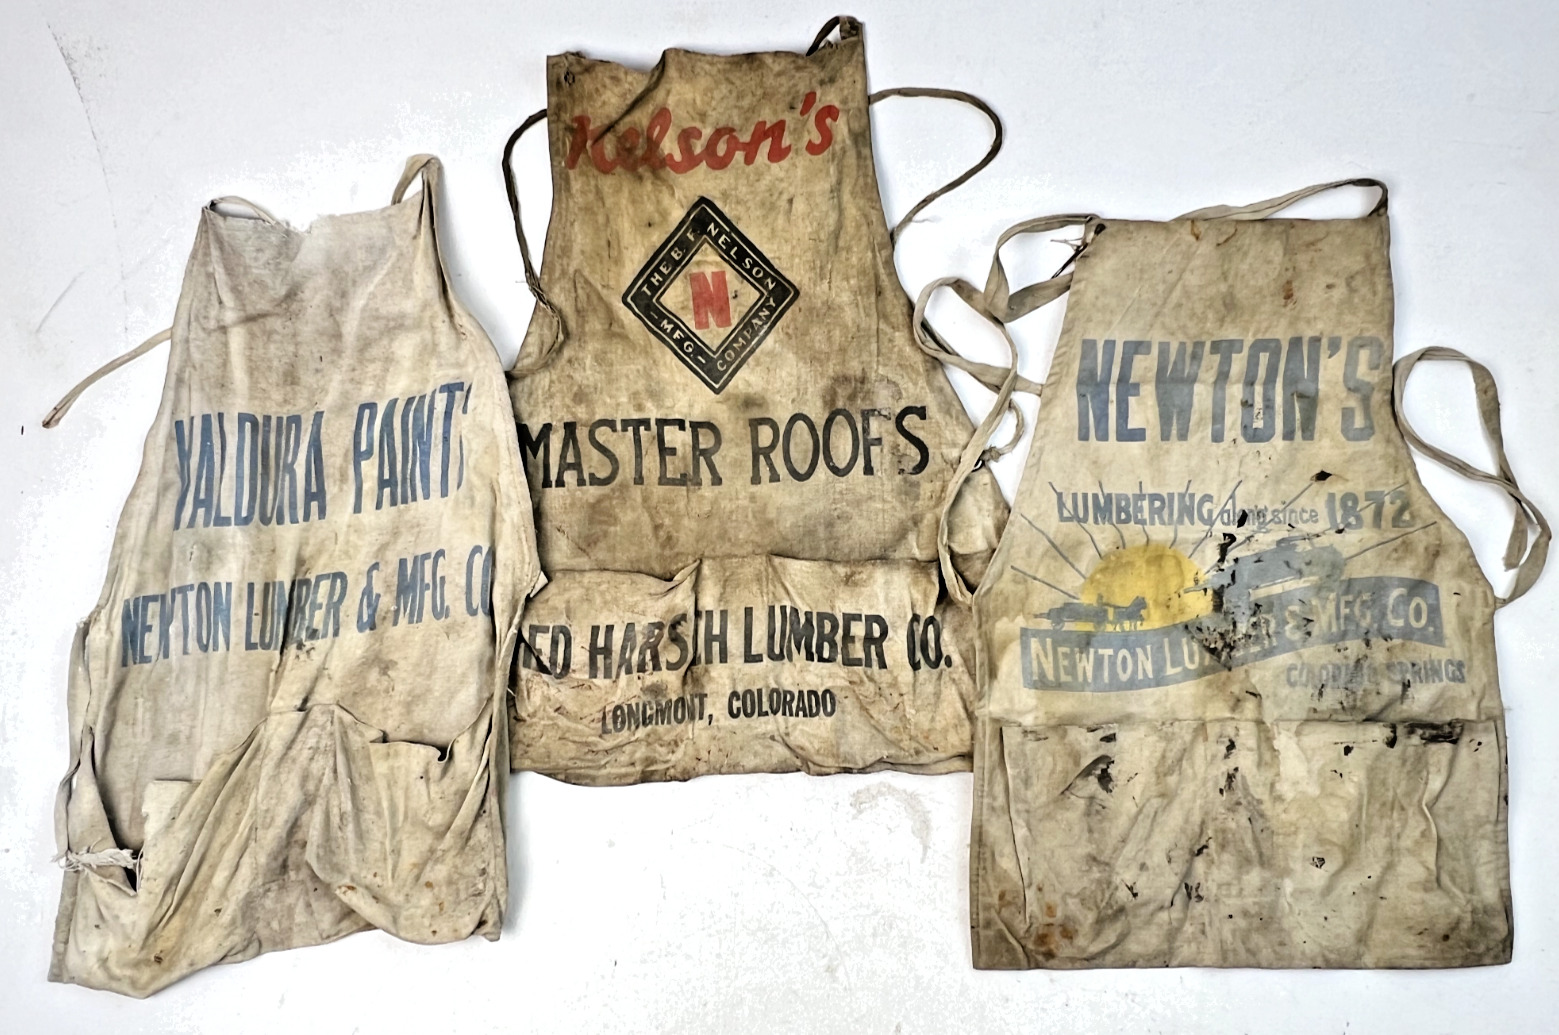 Vintage 1950s Canvas Lumber and Cement Company Aprons - Lot of 10